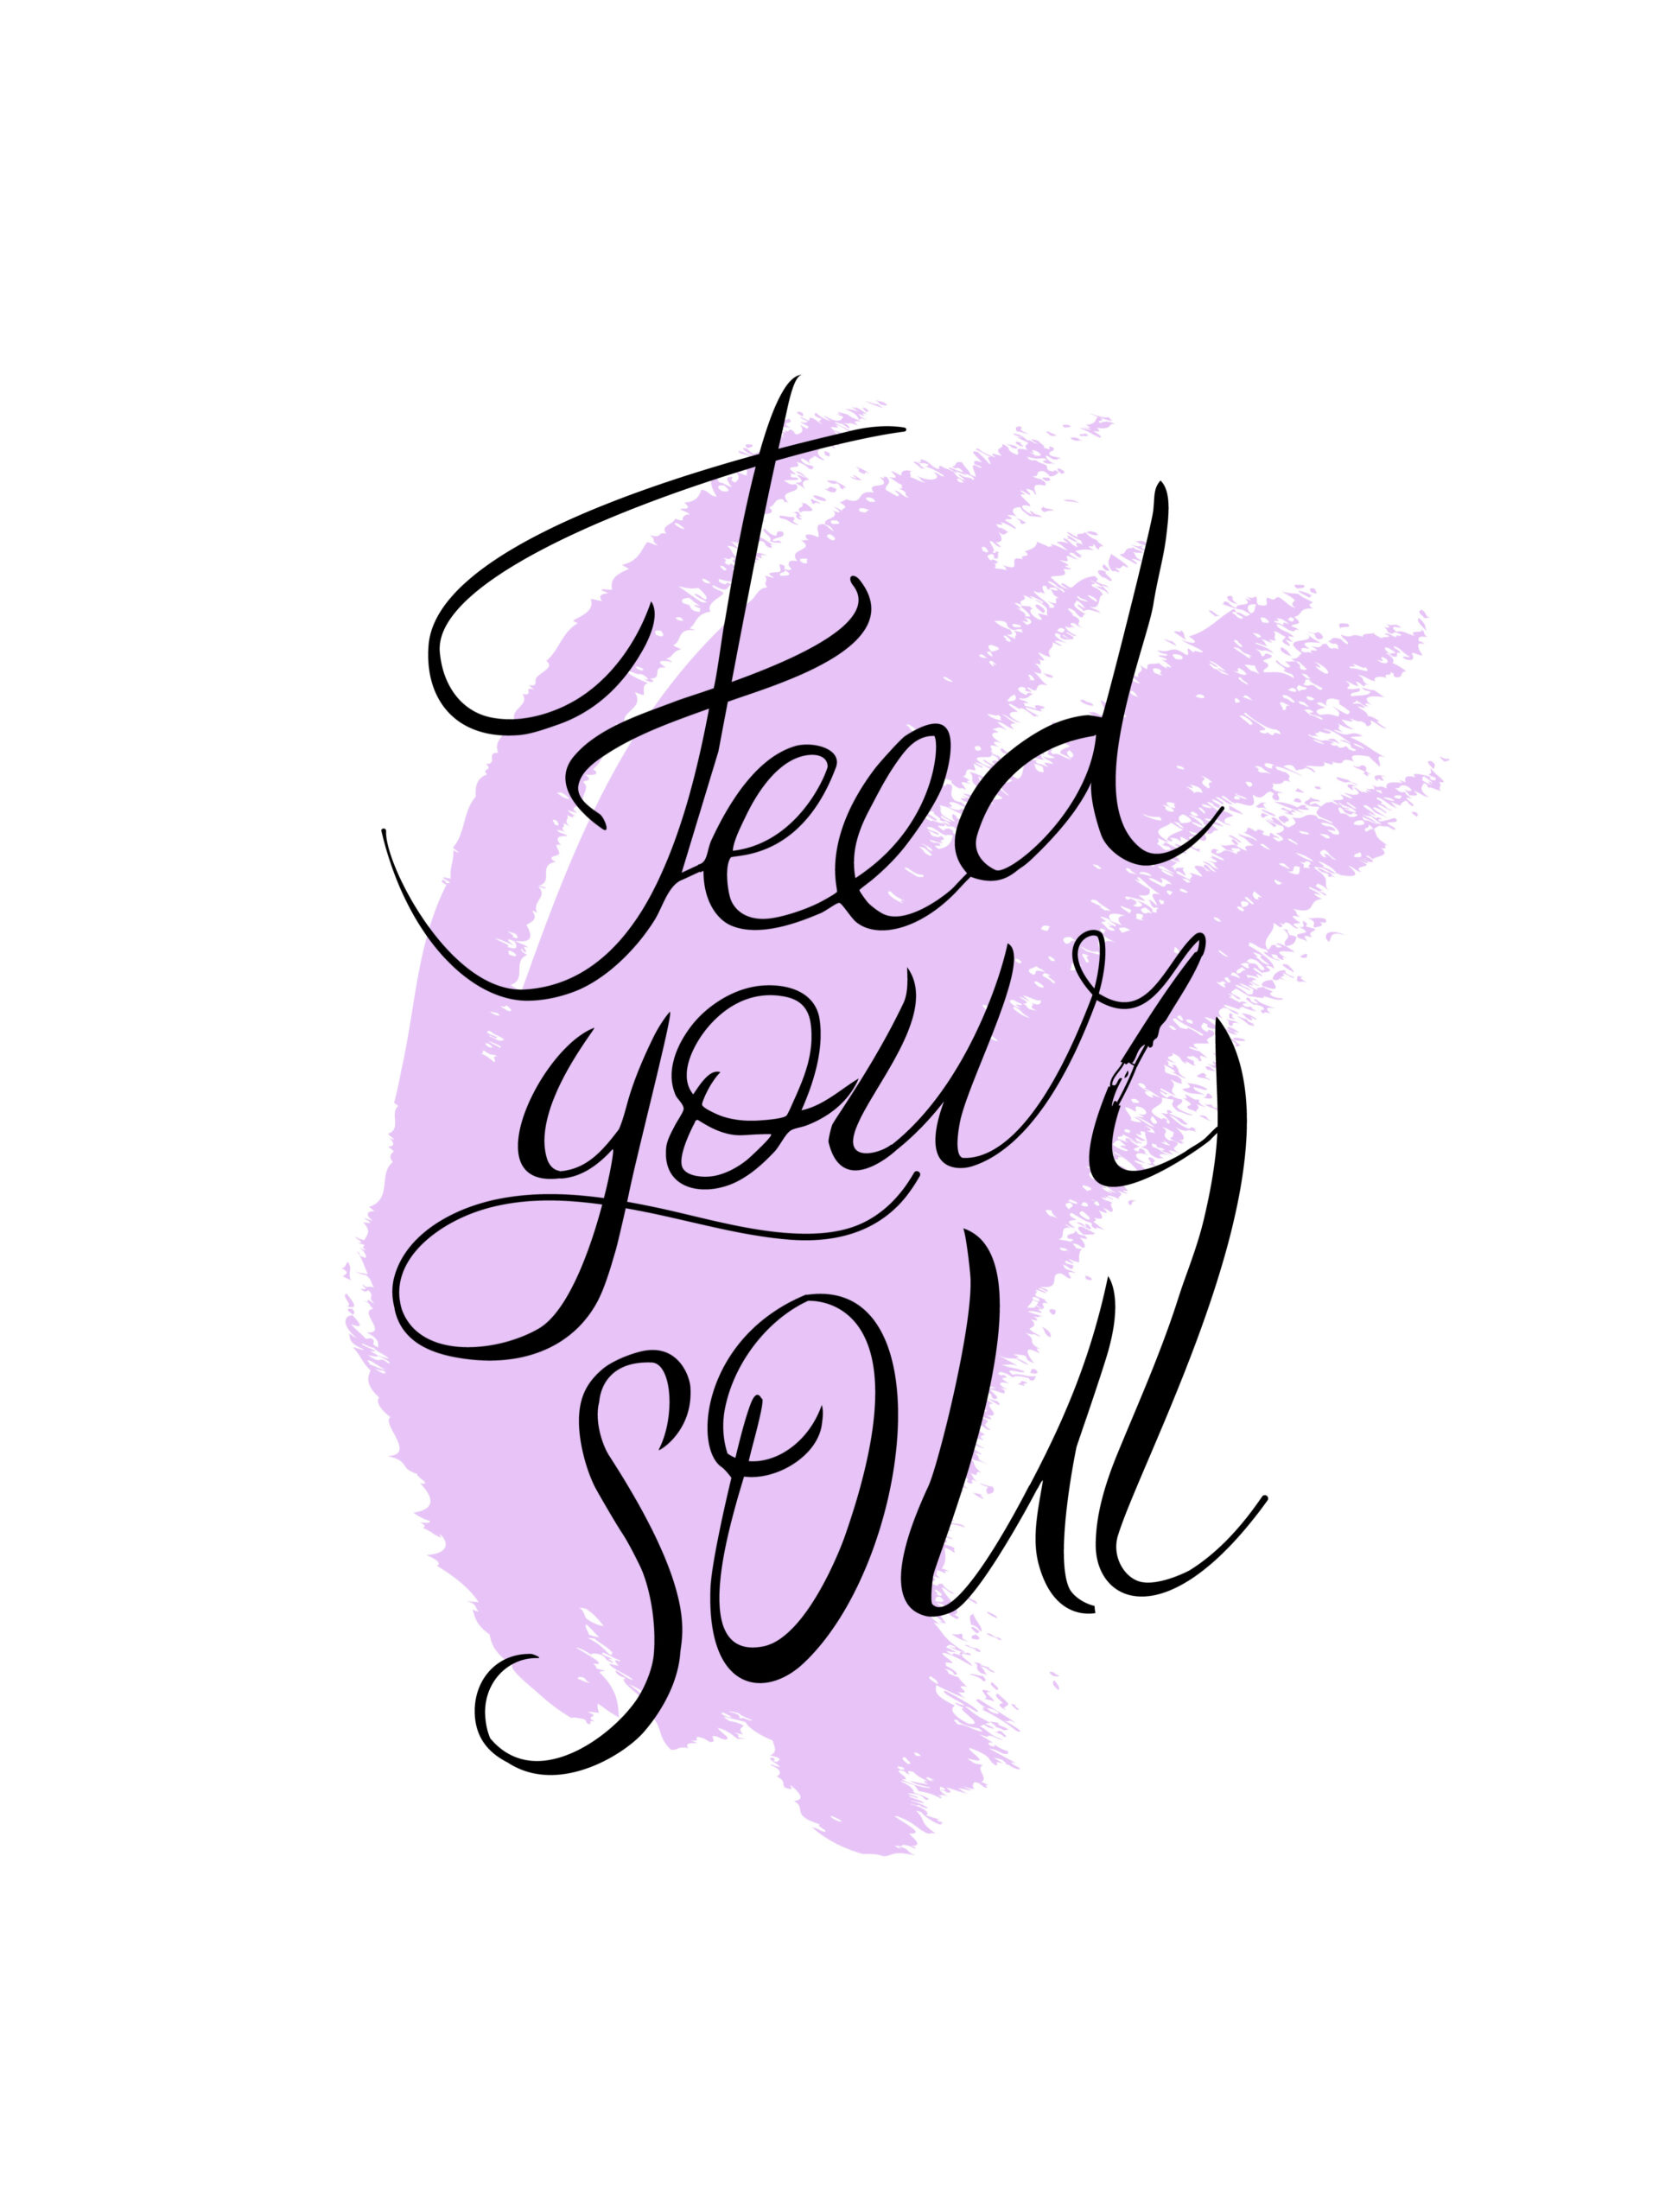 What Feeds You?